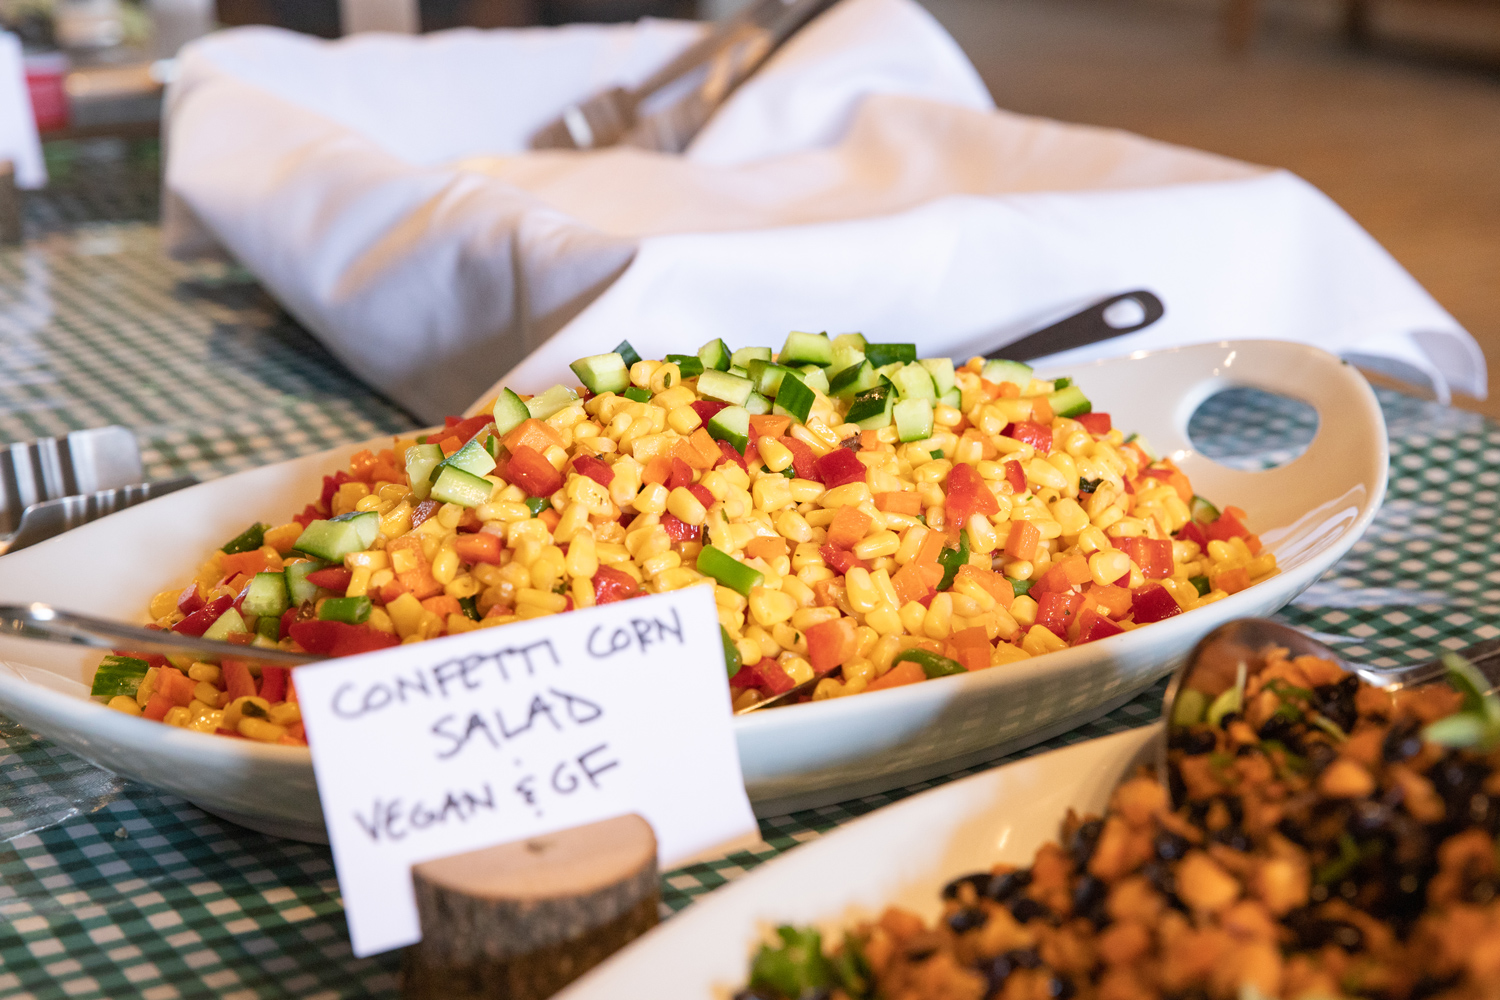 A serving bowl of Confetti Corn Salad on a buffet line.